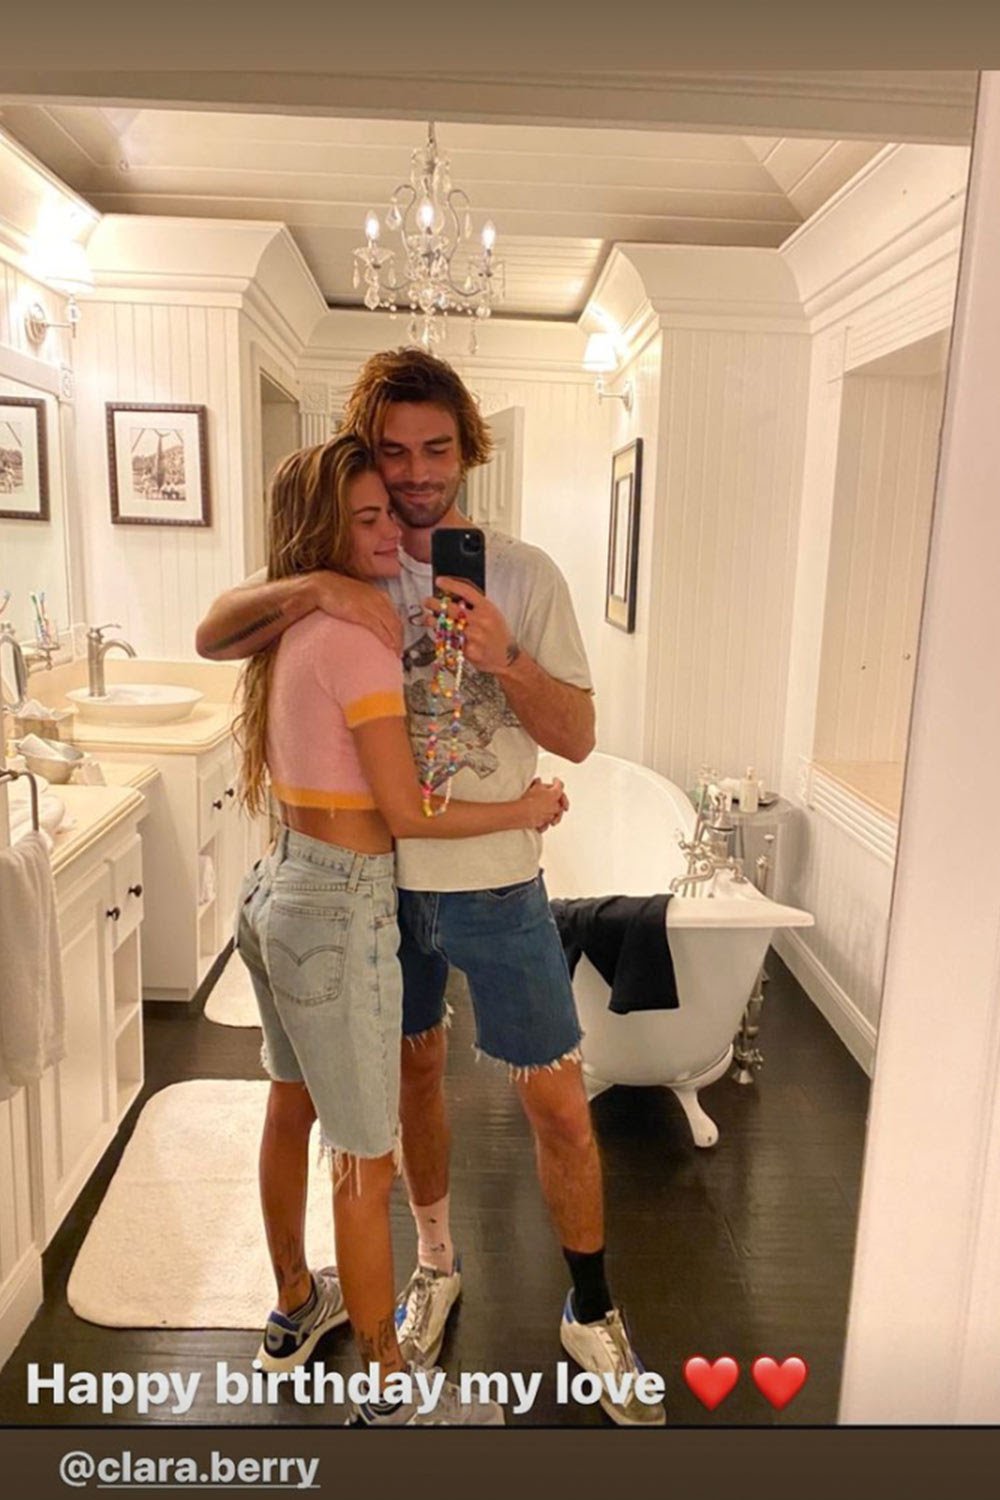 BUNDLE OF JOY ARRIVING!!! When is KJ Apa and Clara Berry’s BABY due?